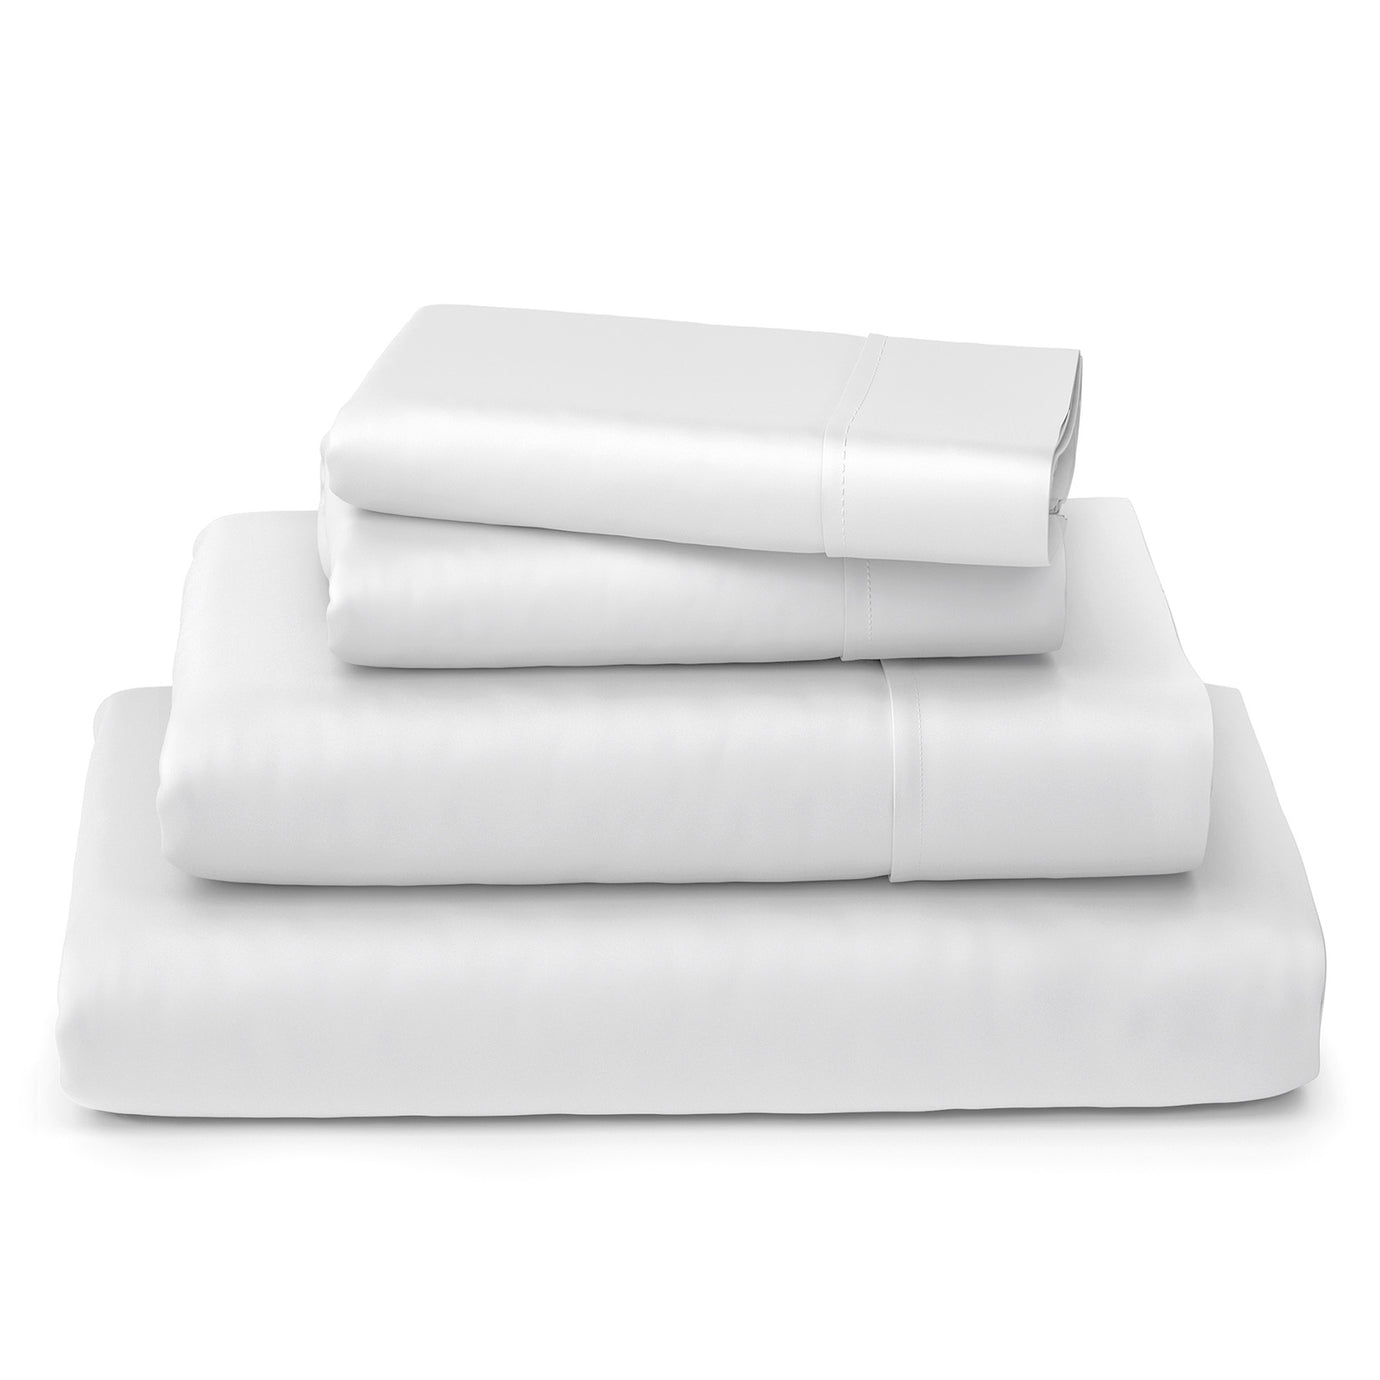 Queen Bed Sheets Set, Bed Sheets Queen Set, Sheets for Queen Size